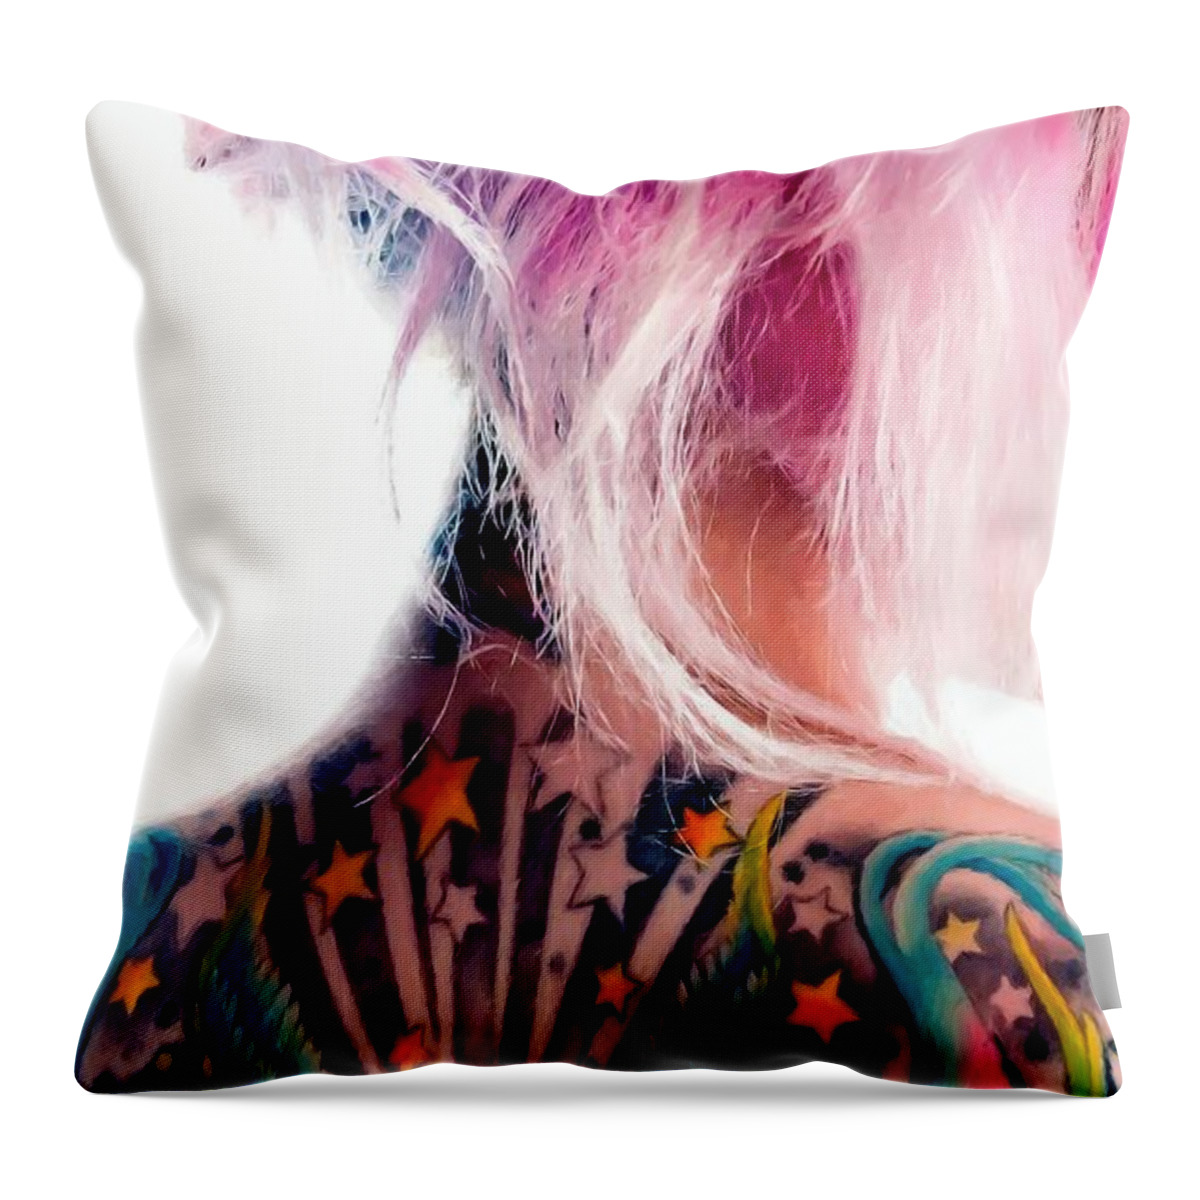 Tattoo Girl Throw Pillow featuring the digital art Tribute to Suicide Girls 3 by Gabriel T Toro